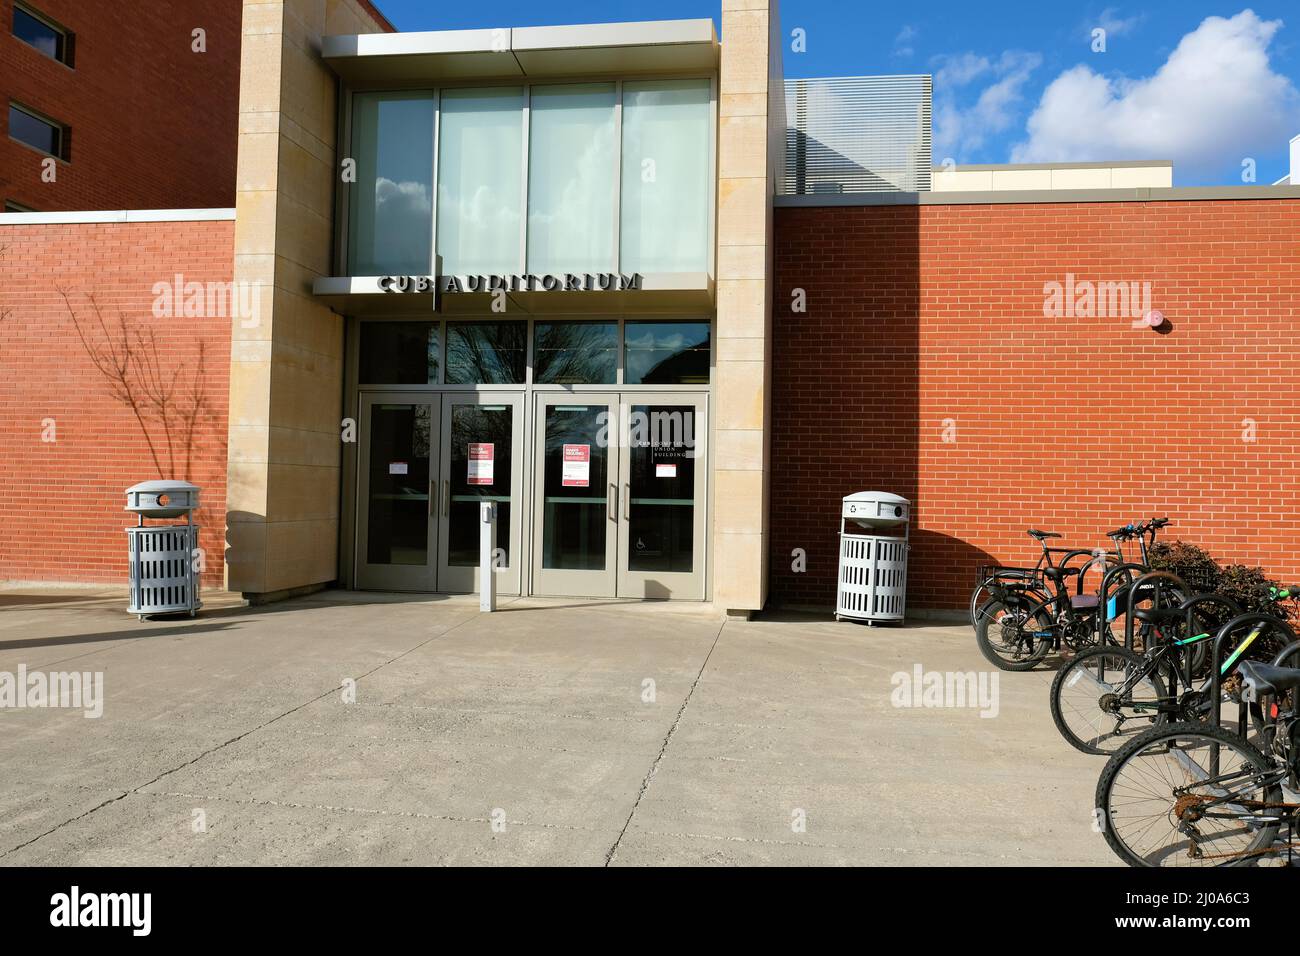 Entrance to the Compton Union Building on the campus of Washington State University in Pullman, Washington, USA; CUB student center and bike racks. Stock Photo